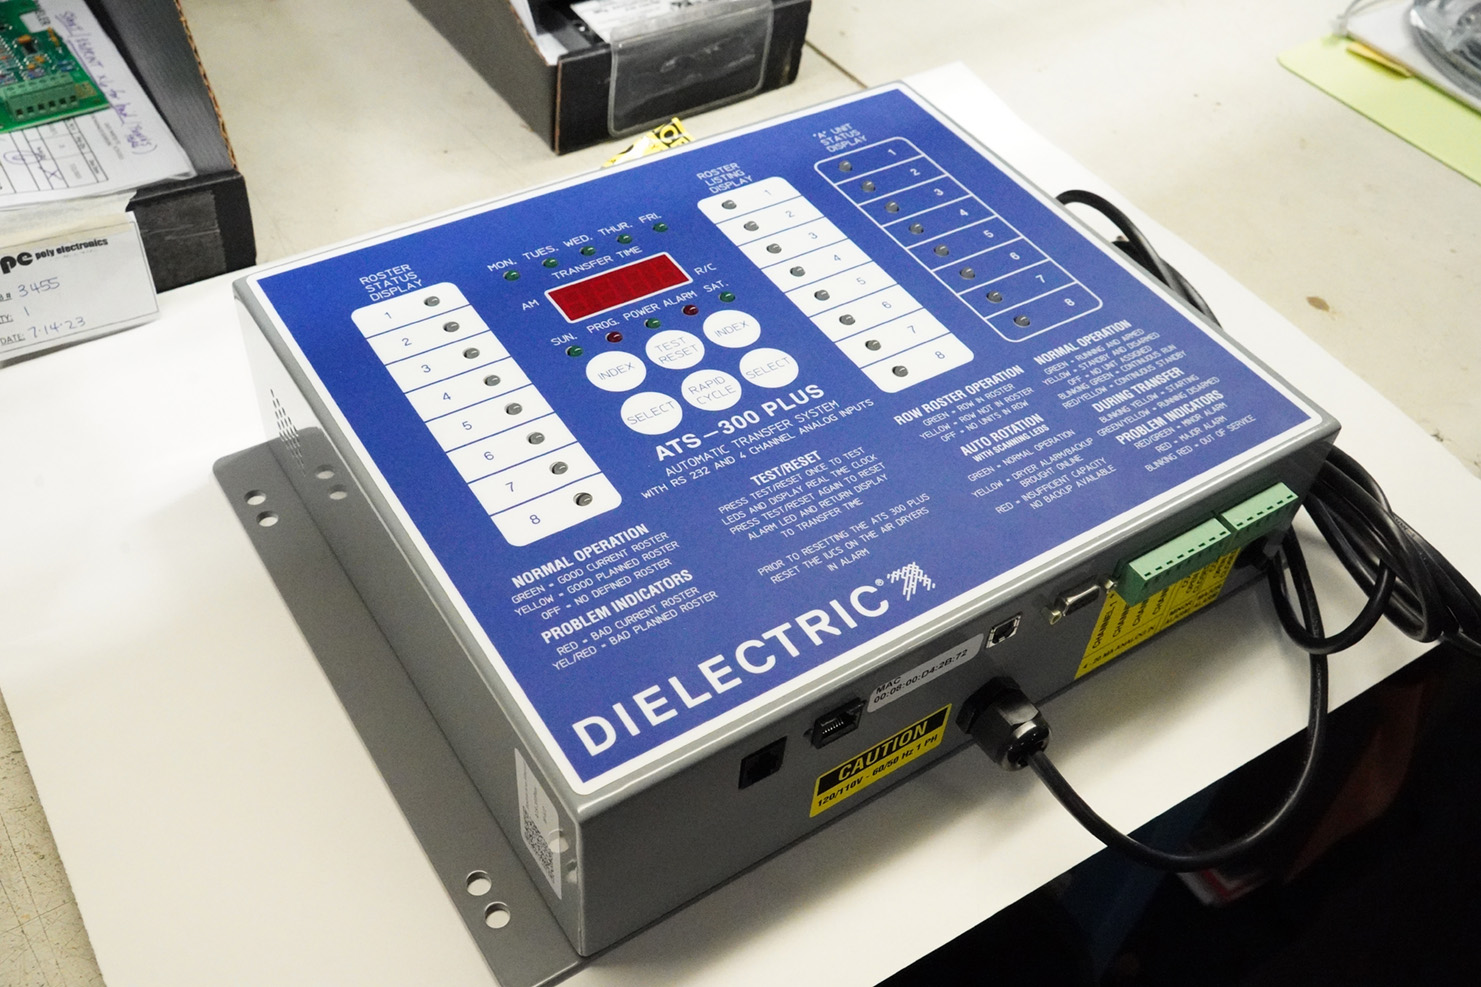 Dilelectric Box Build with LED Display